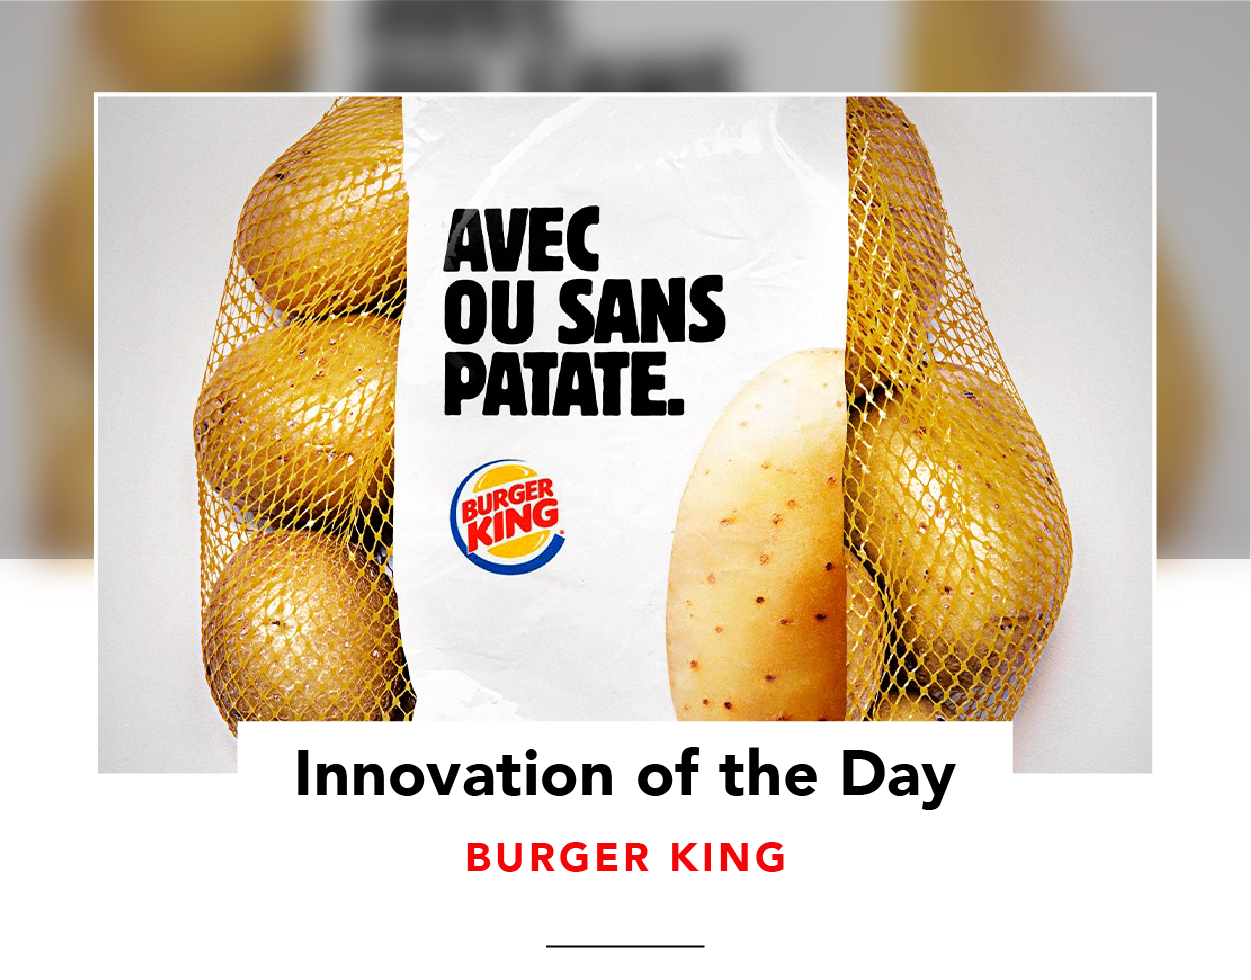 Bag of potatoes with Burger King branding and the slogan 'Avec ou sans patate'.